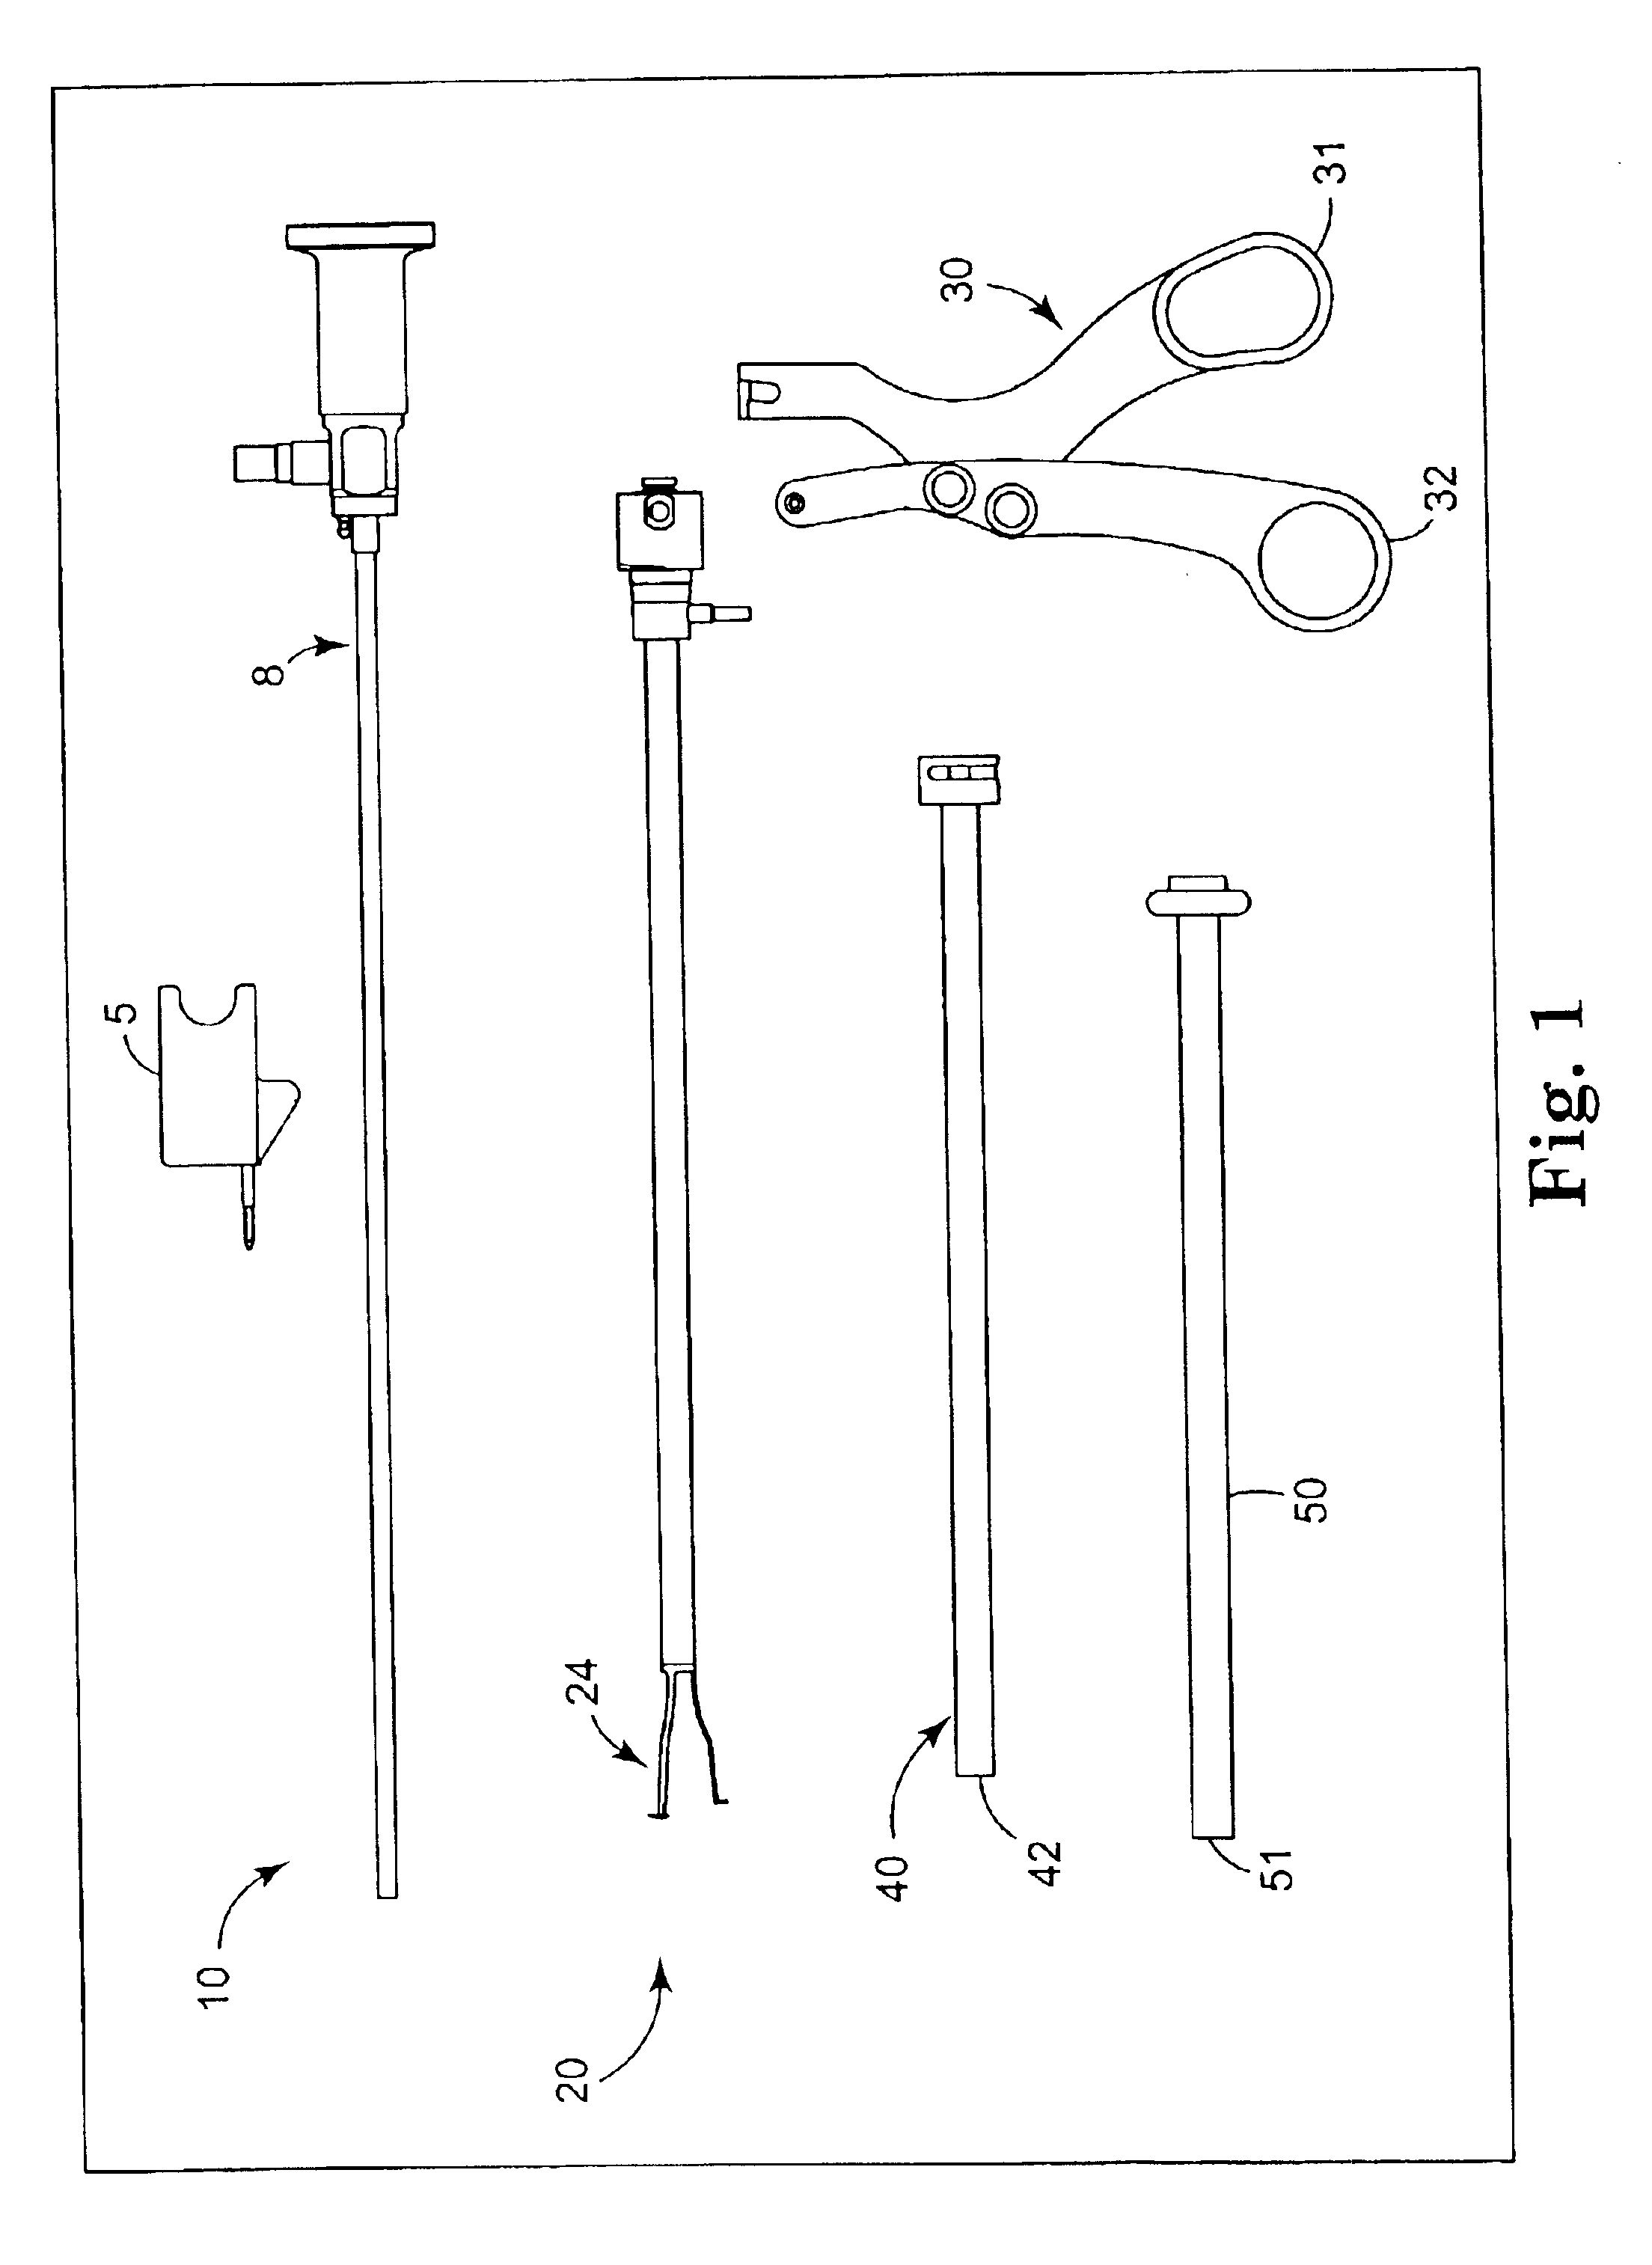 Foreign body retrieval device and method